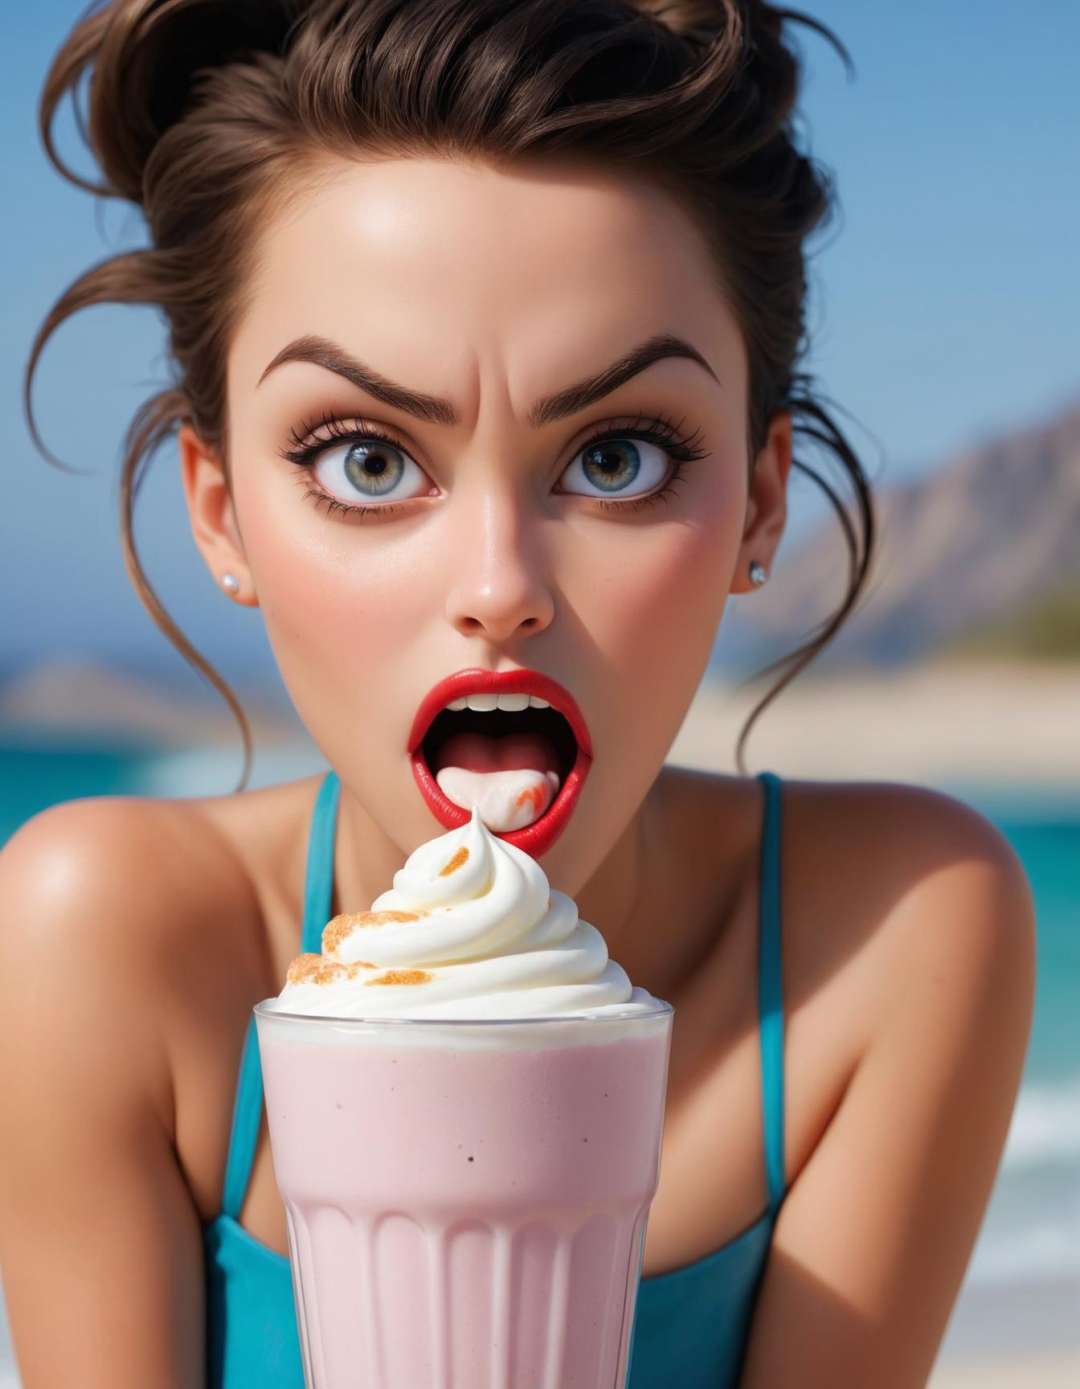 a look of terror scared horrified , photography style,  a delicious food photograph of milkshakes served for dessert!  ,   by  Herb Ritts beauty512